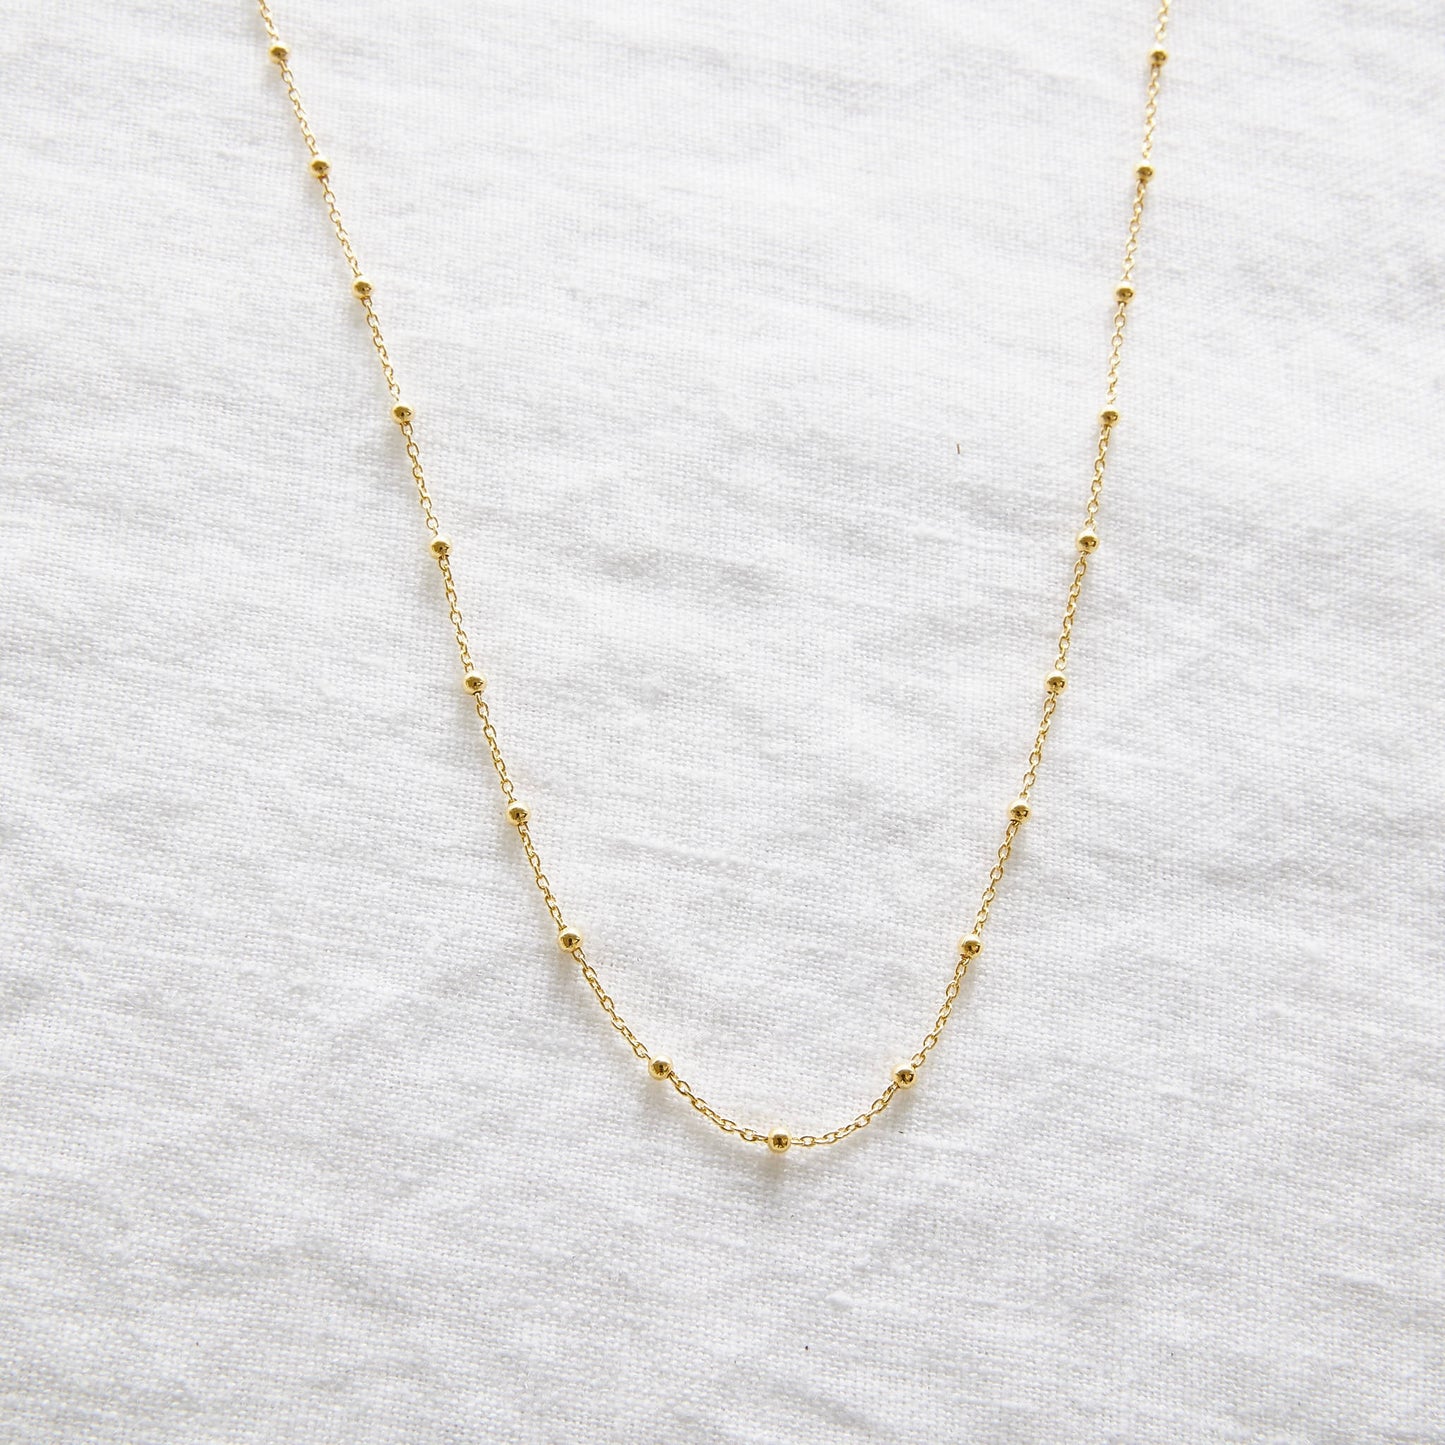 Ball chain Necklace 24k Gold plated sterling silver